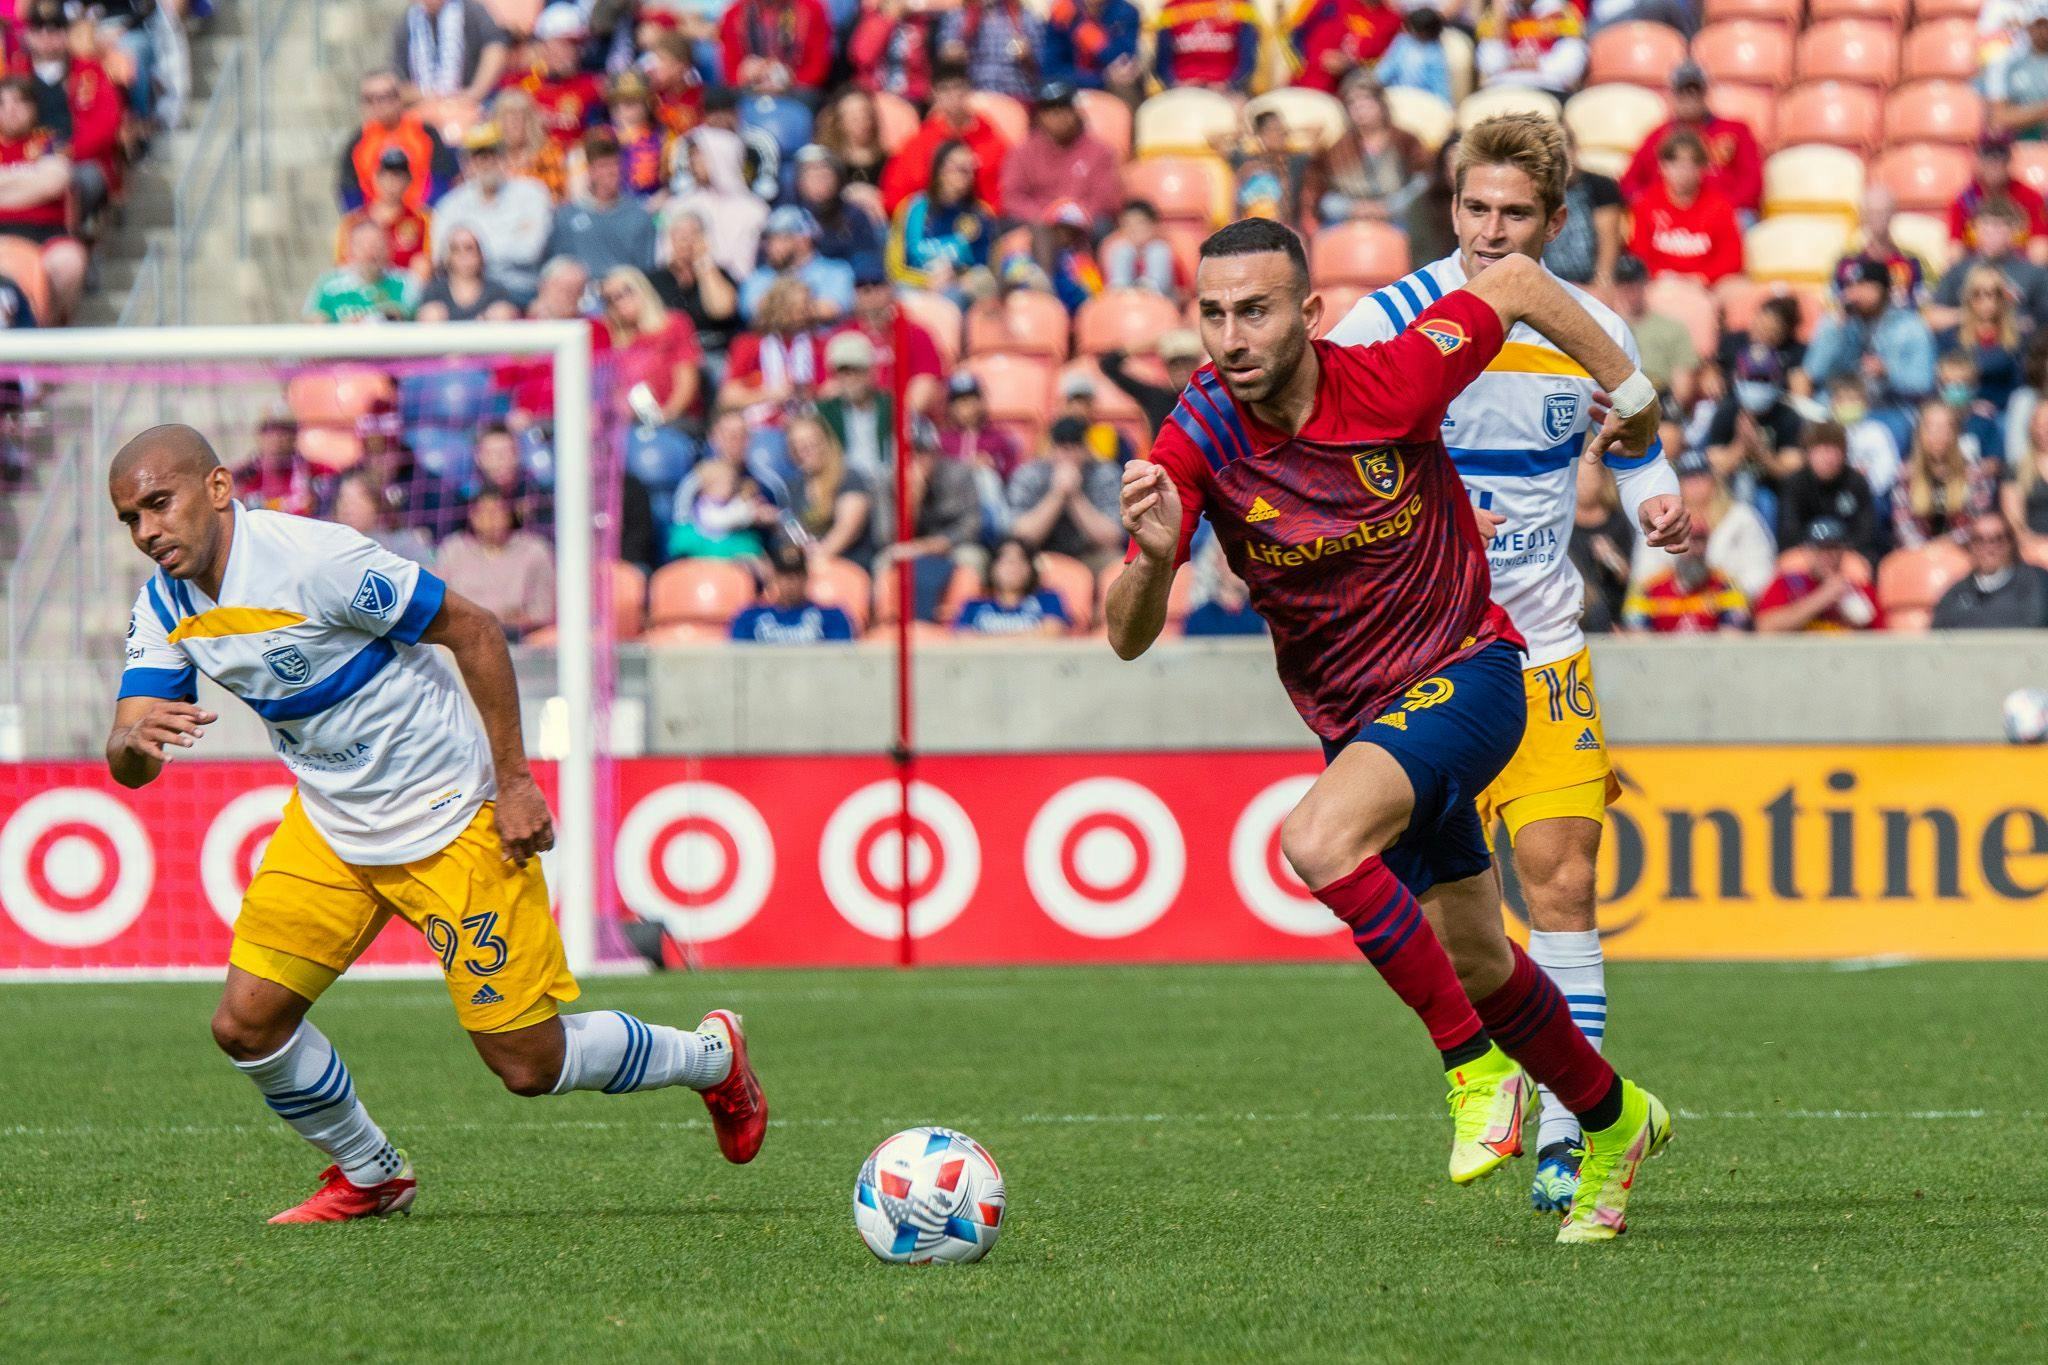 What we’re watching in Real Salt Lake vs. San Jose Earthquakes